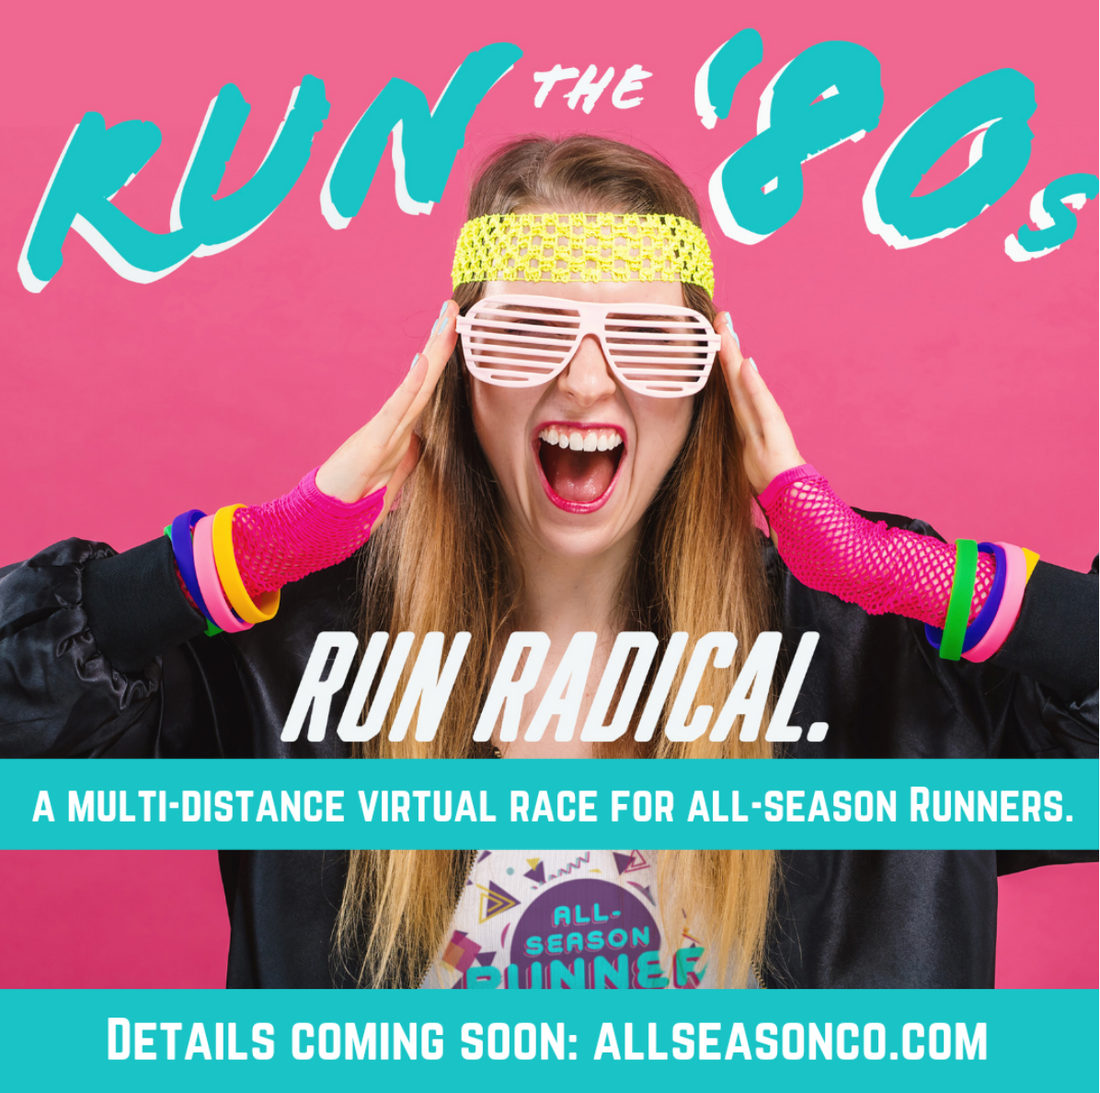 Teaser Announcement: We're hosting our very first All-Season Runner virtual race!